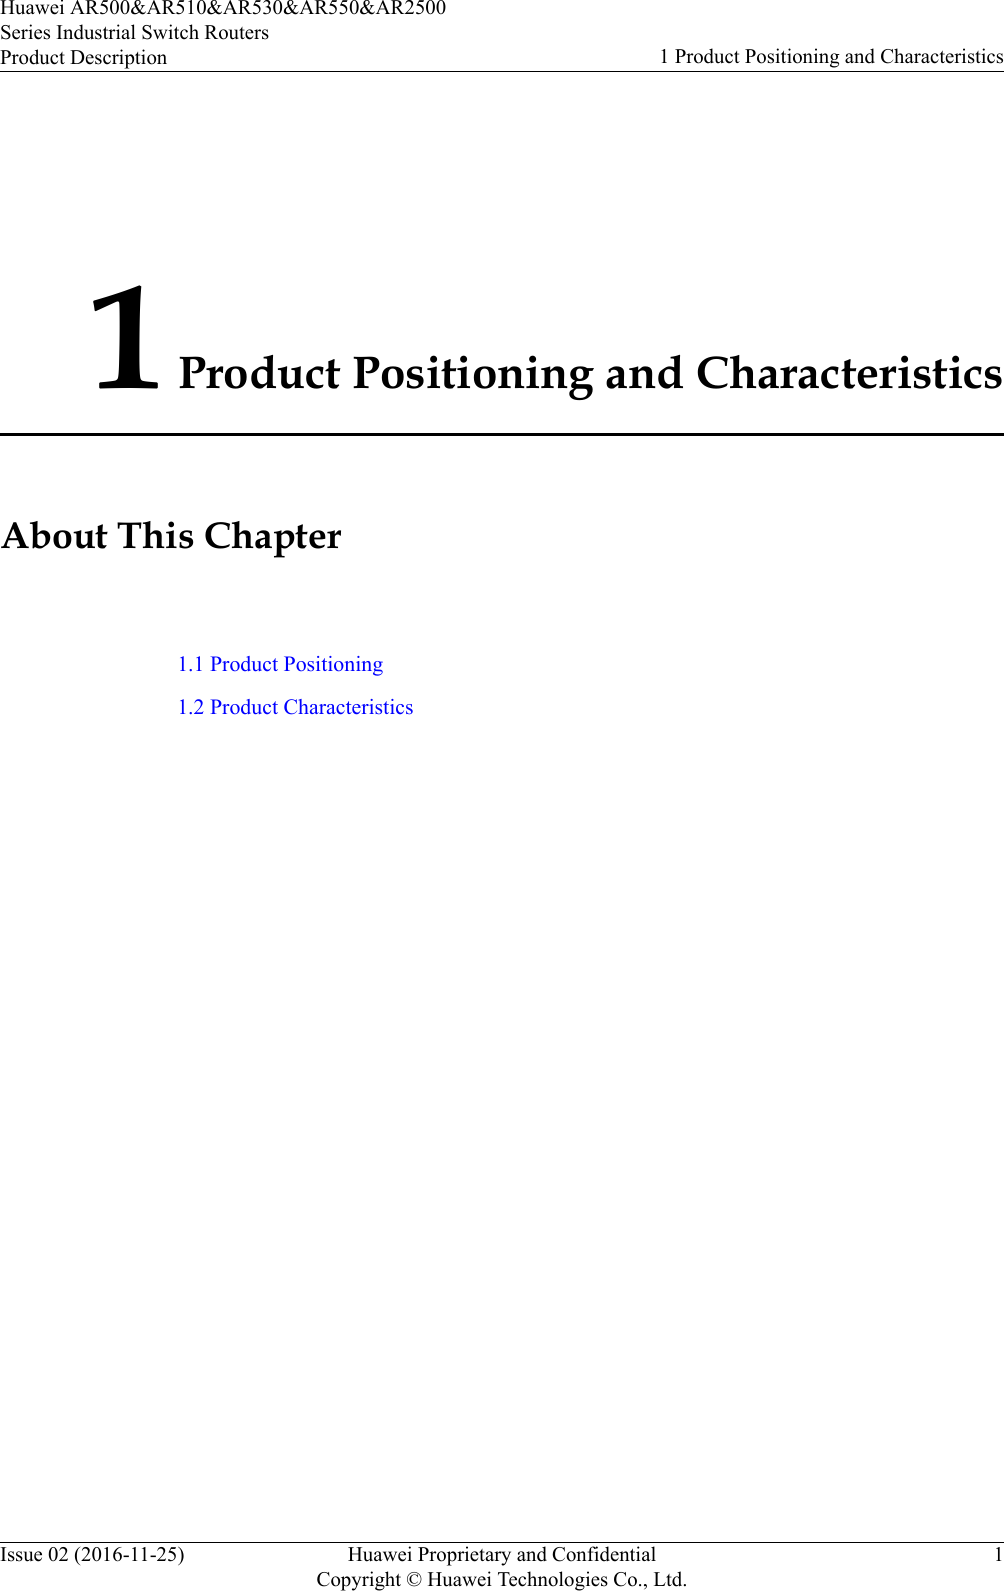 1 Product Positioning and CharacteristicsAbout This Chapter1.1 Product Positioning1.2 Product CharacteristicsHuawei AR500&amp;AR510&amp;AR530&amp;AR550&amp;AR2500Series Industrial Switch RoutersProduct Description 1 Product Positioning and CharacteristicsIssue 02 (2016-11-25) Huawei Proprietary and ConfidentialCopyright © Huawei Technologies Co., Ltd.1